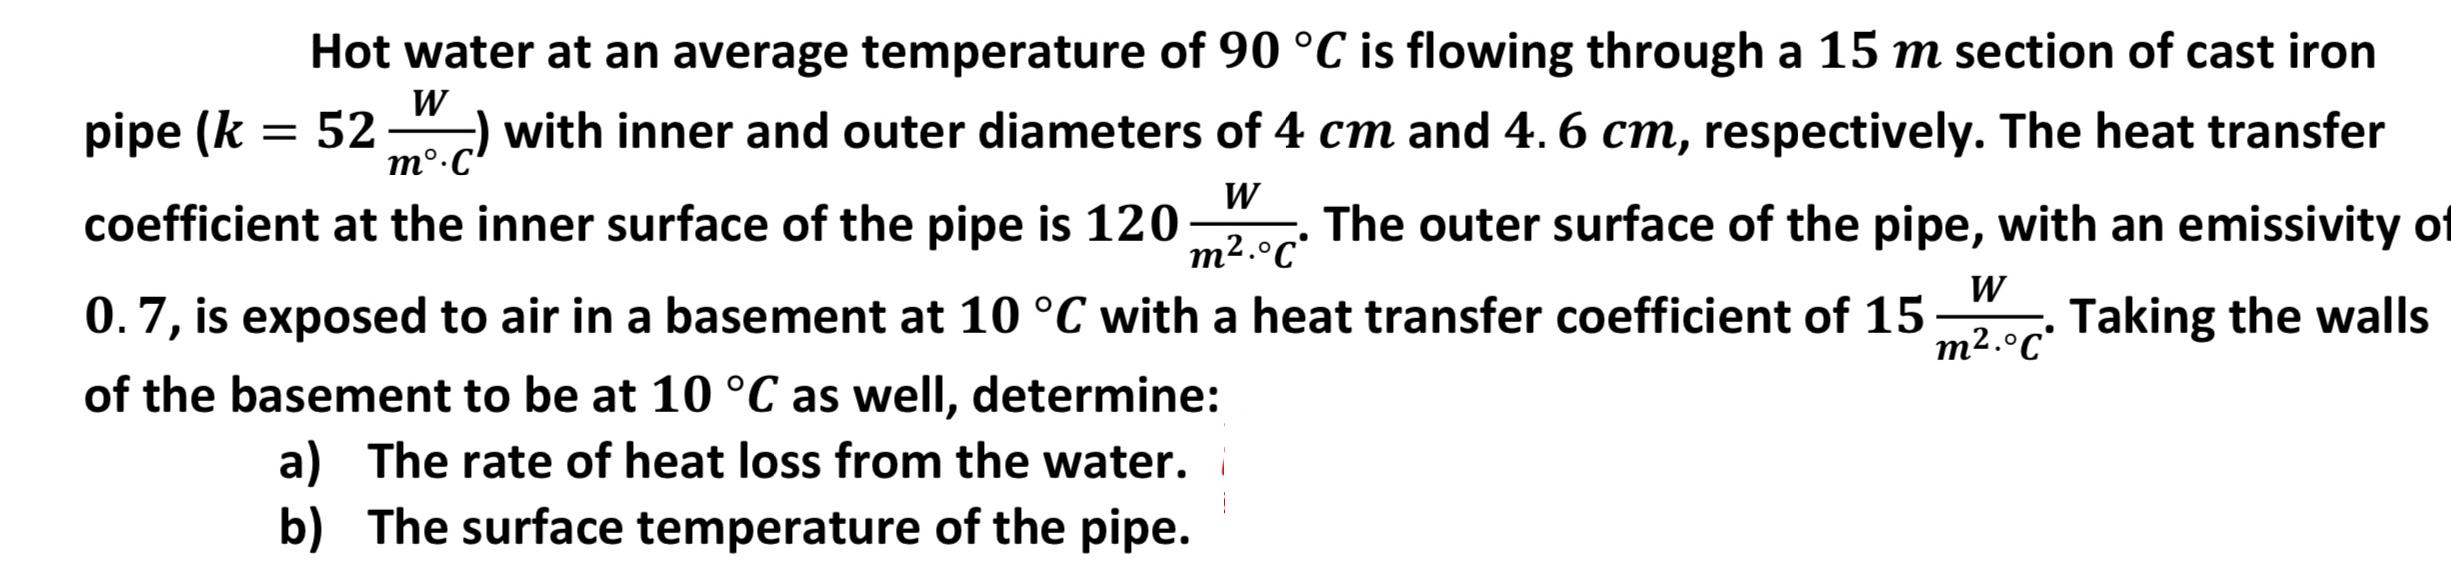 W m.C Hot water at an average temperature of 90 C is flowing through a 15 m section of cast iron pipe (k = 52